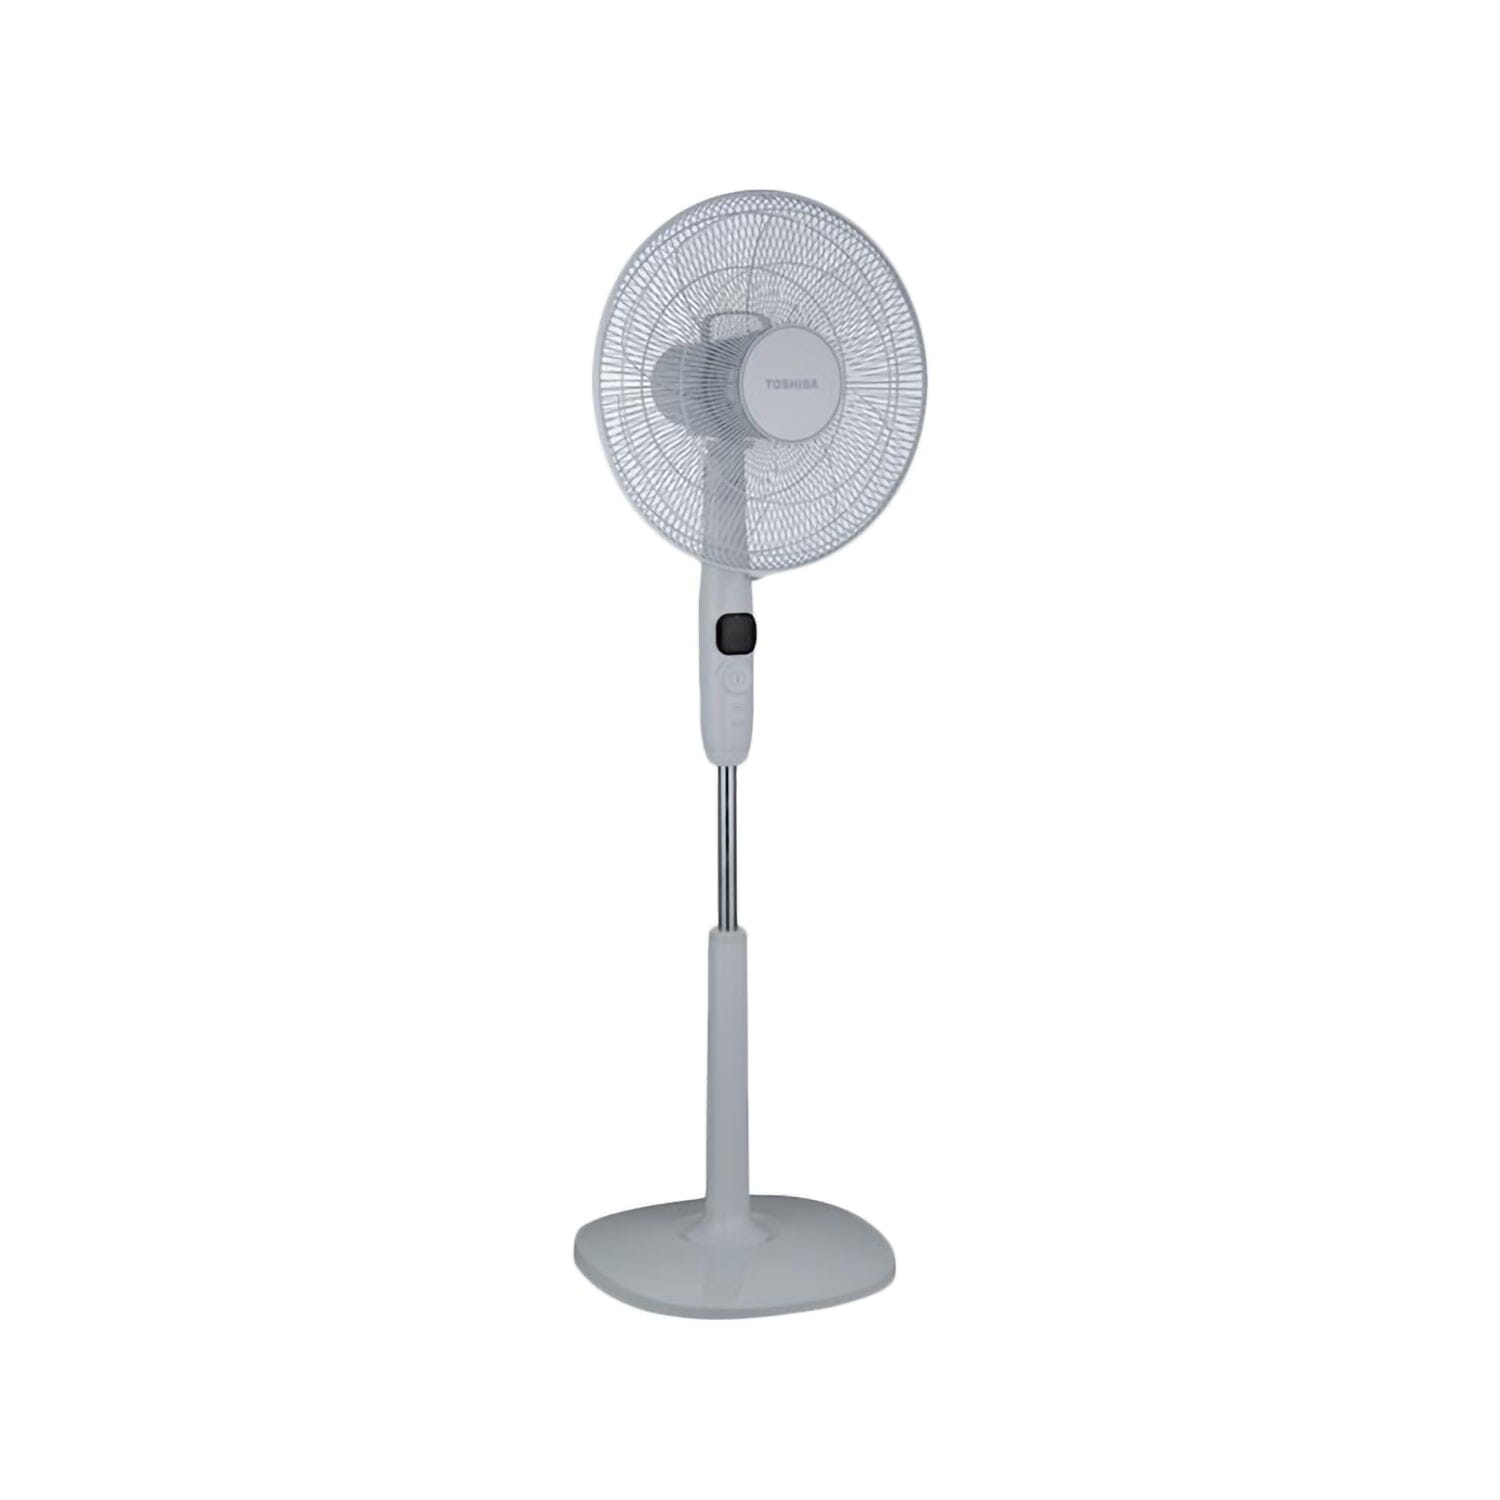 Toshiba 16" Stand Fan, Wide Angle Oscillation Blades DC Inverter Stand Fan with Infra Remote Control Toshiba 